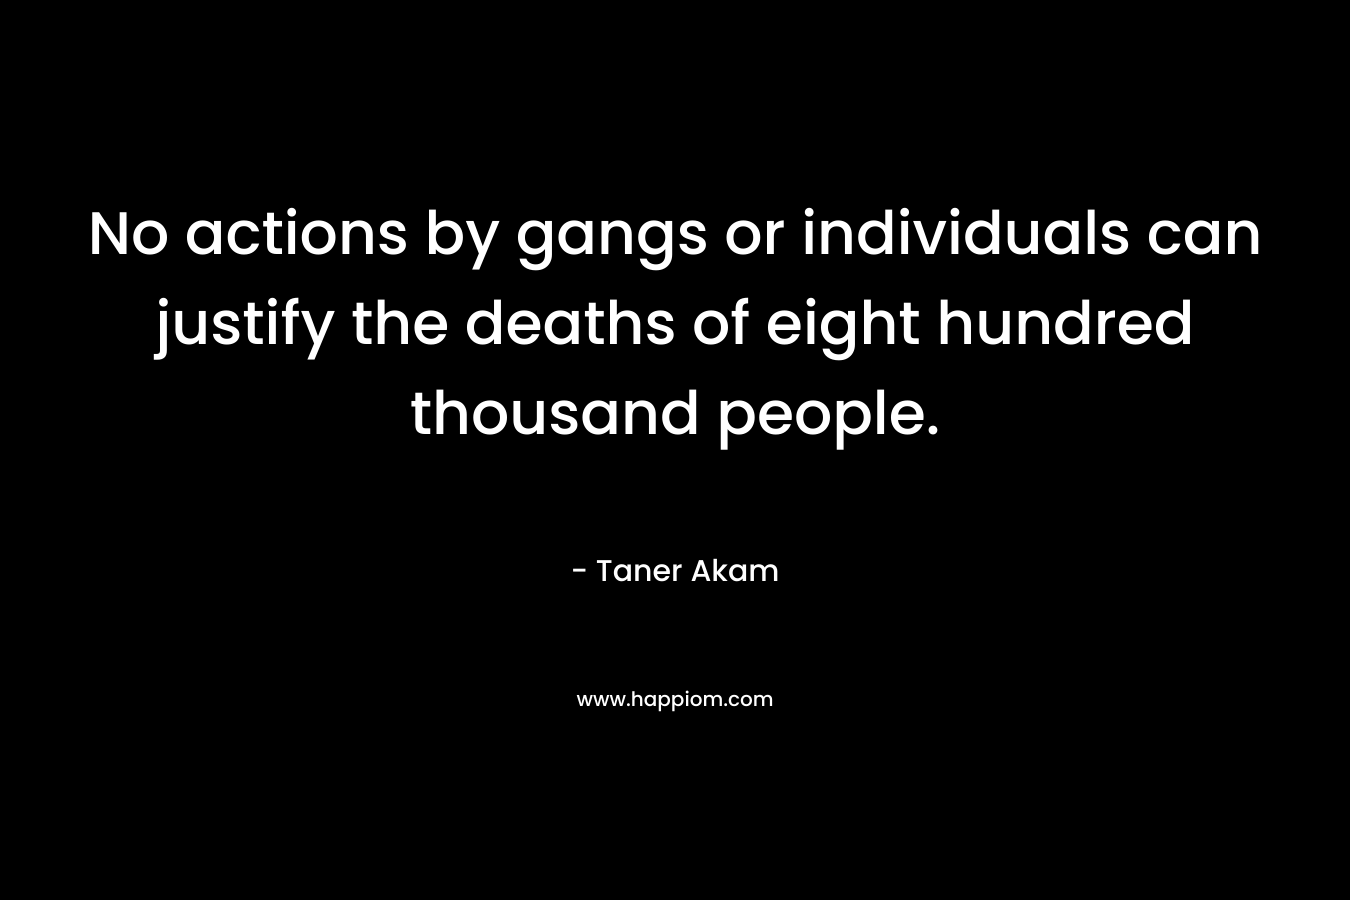 No actions by gangs or individuals can justify the deaths of eight hundred thousand people. – Taner Akam